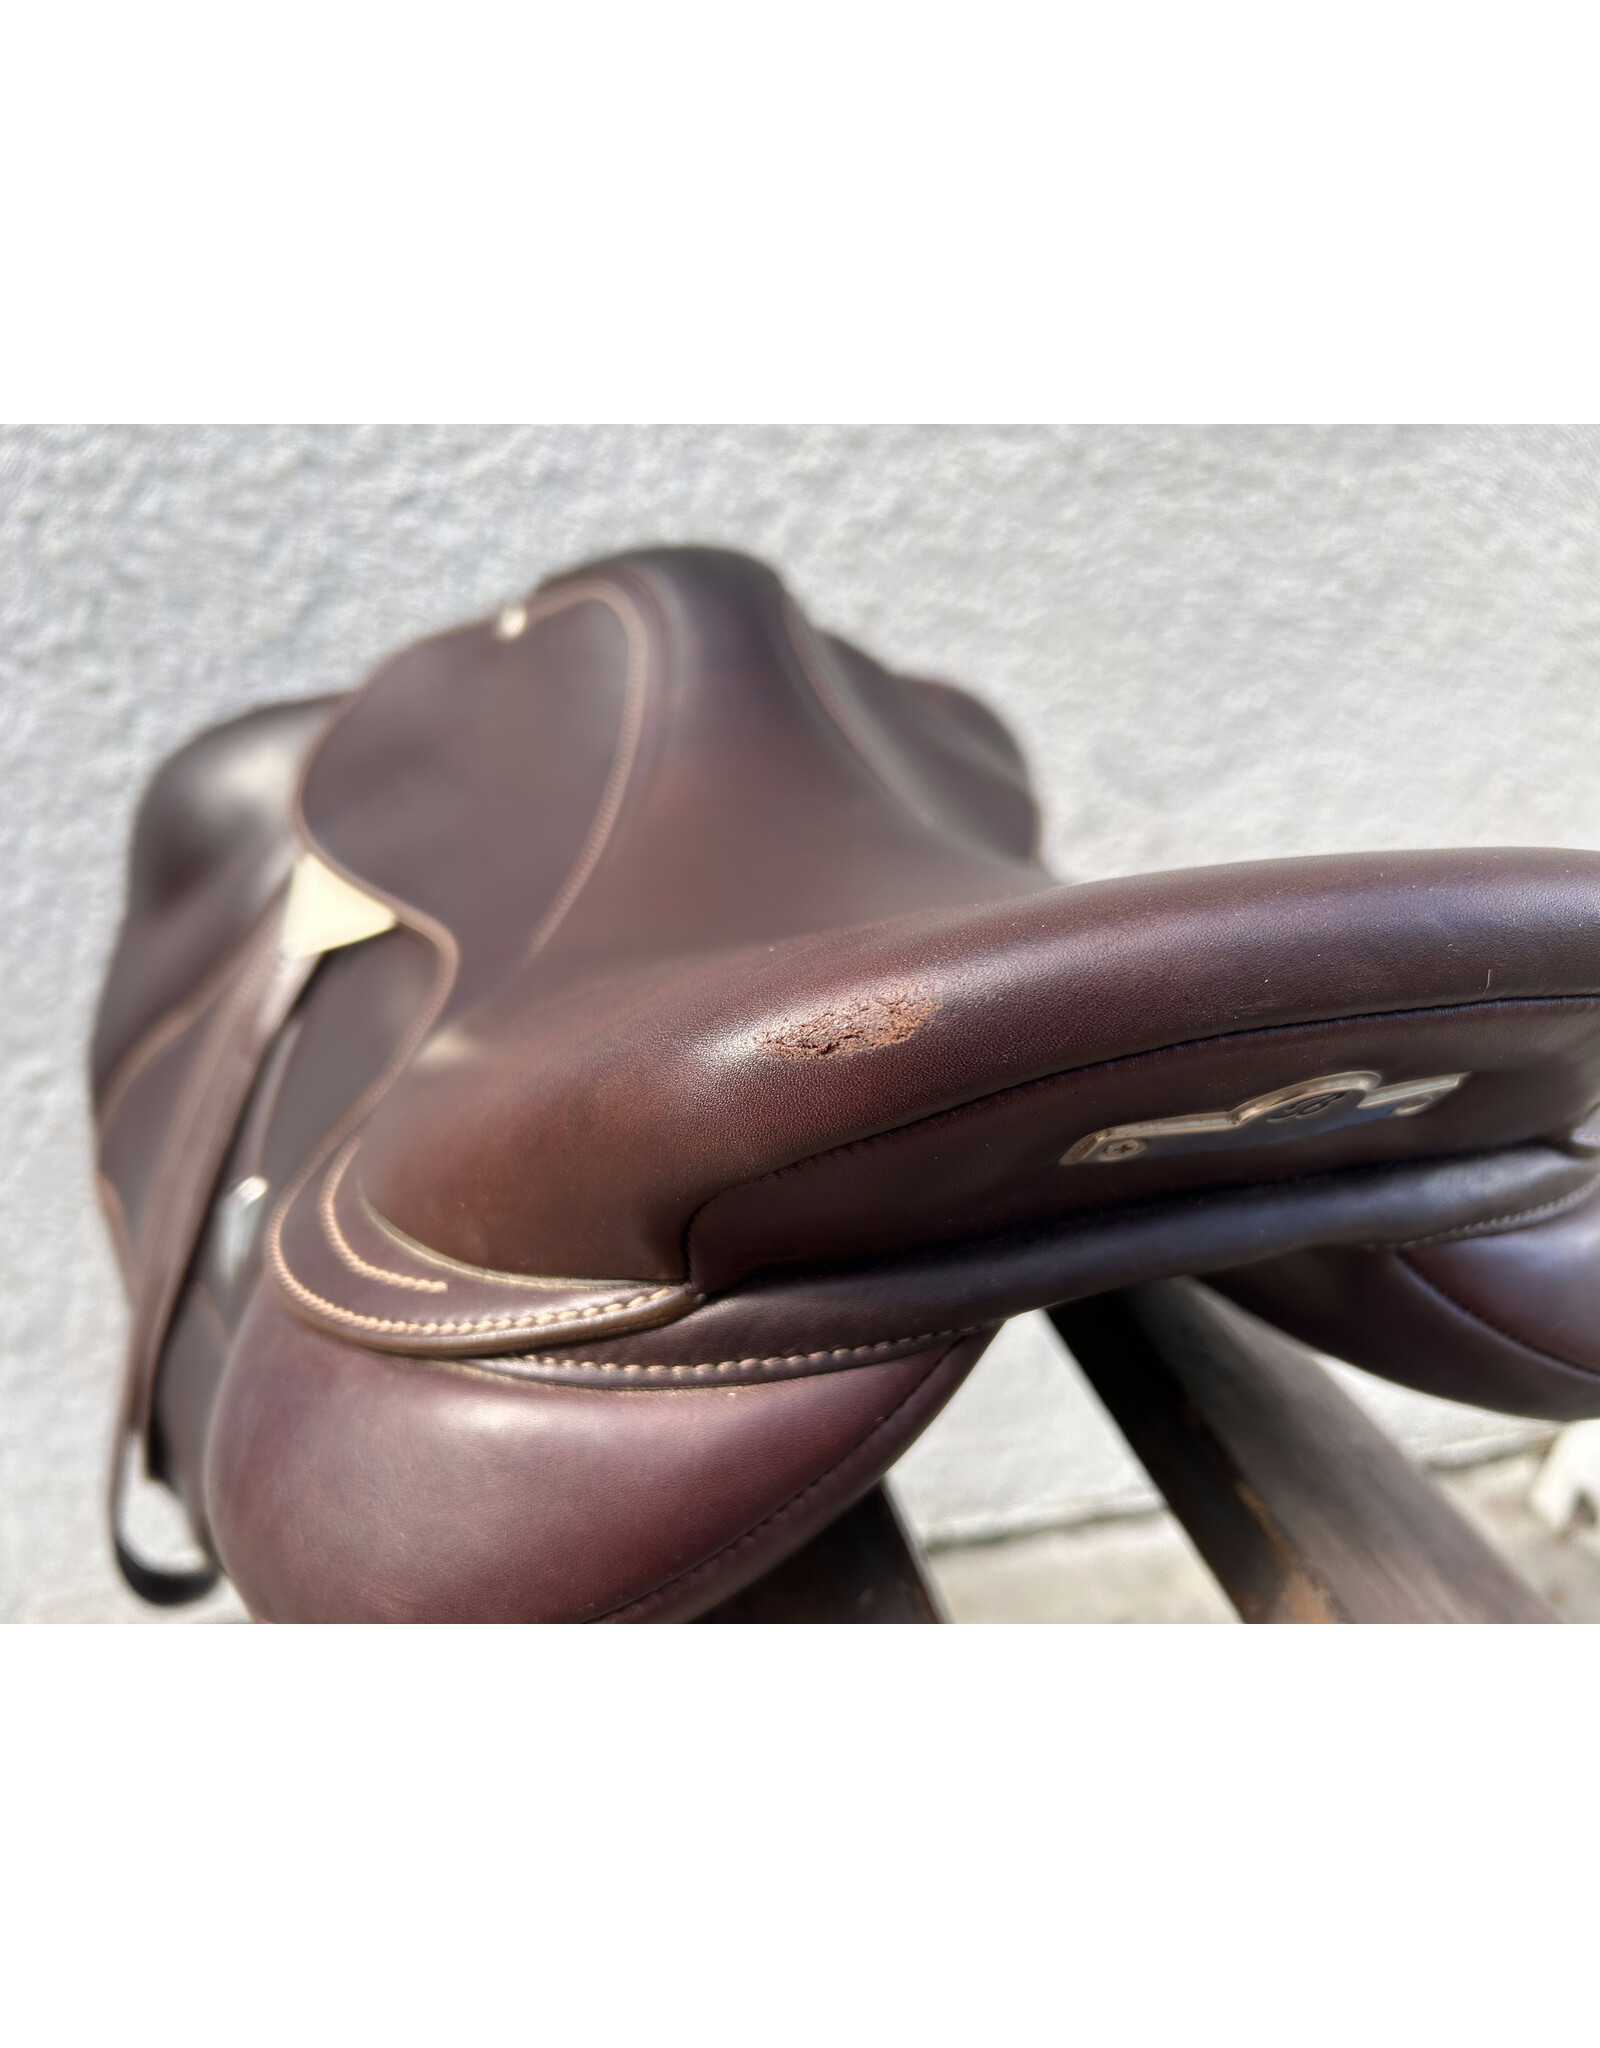 Bates Elevation Jump Saddle with CAIR, Havana/Brown, 17.5", soft & grippy luxe leather, Easy-Change Fit Solution Medium Gullet Installed, Schockemole 50" leathers + bates saddle cover